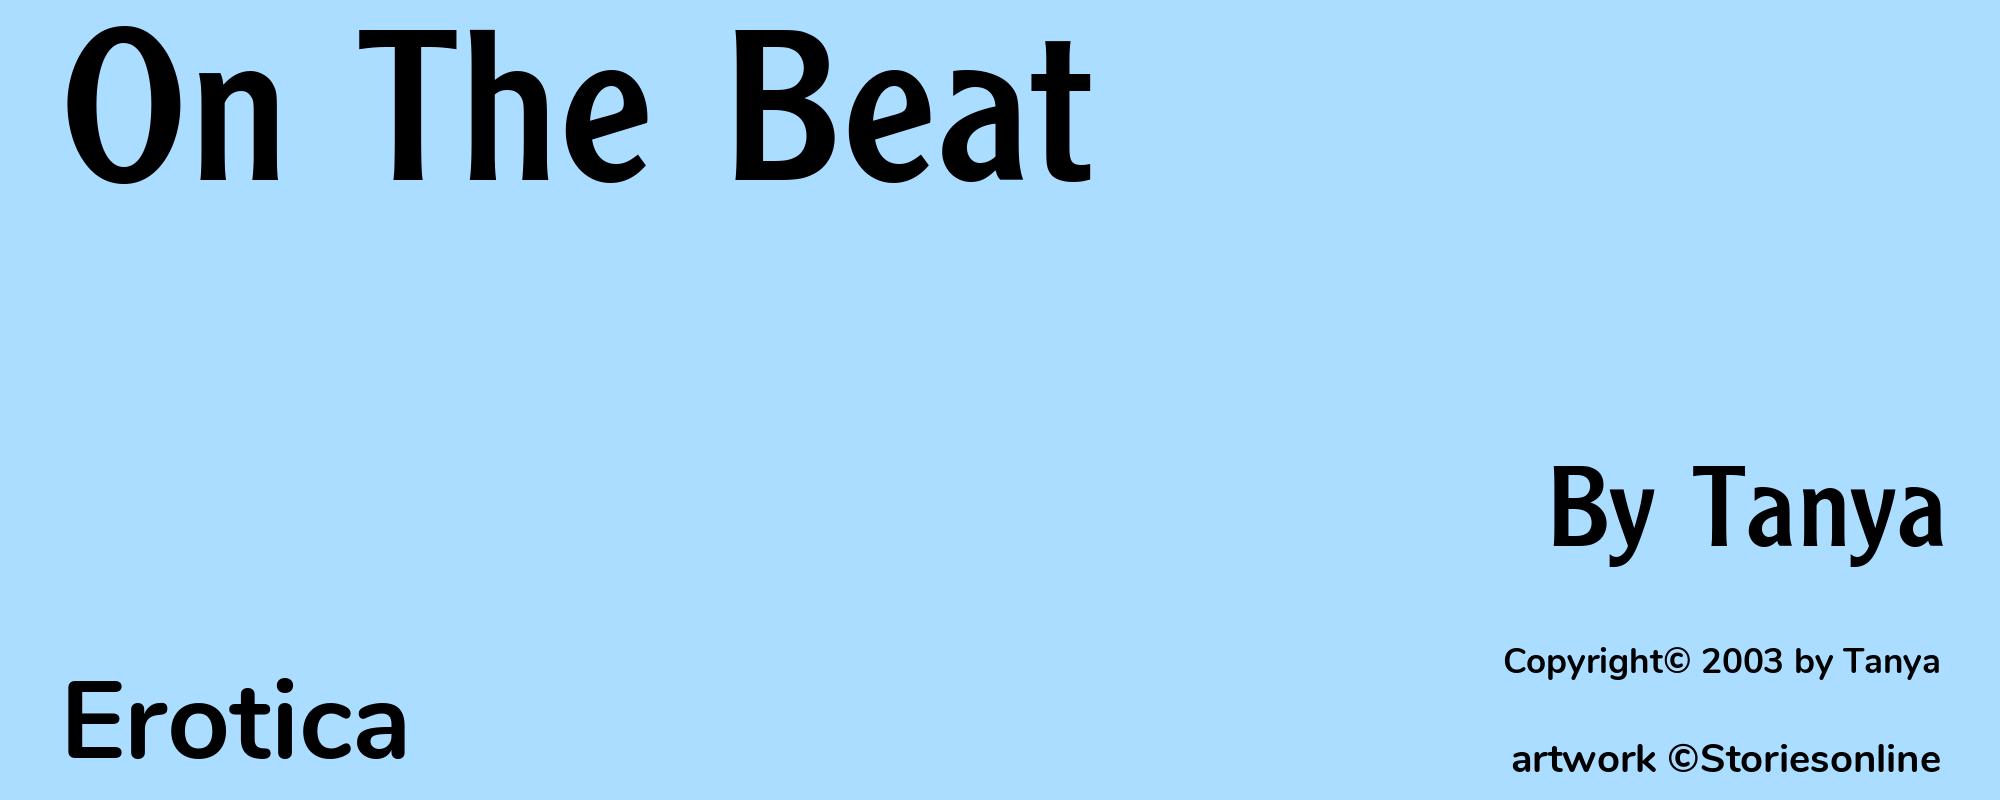 On The Beat - Cover